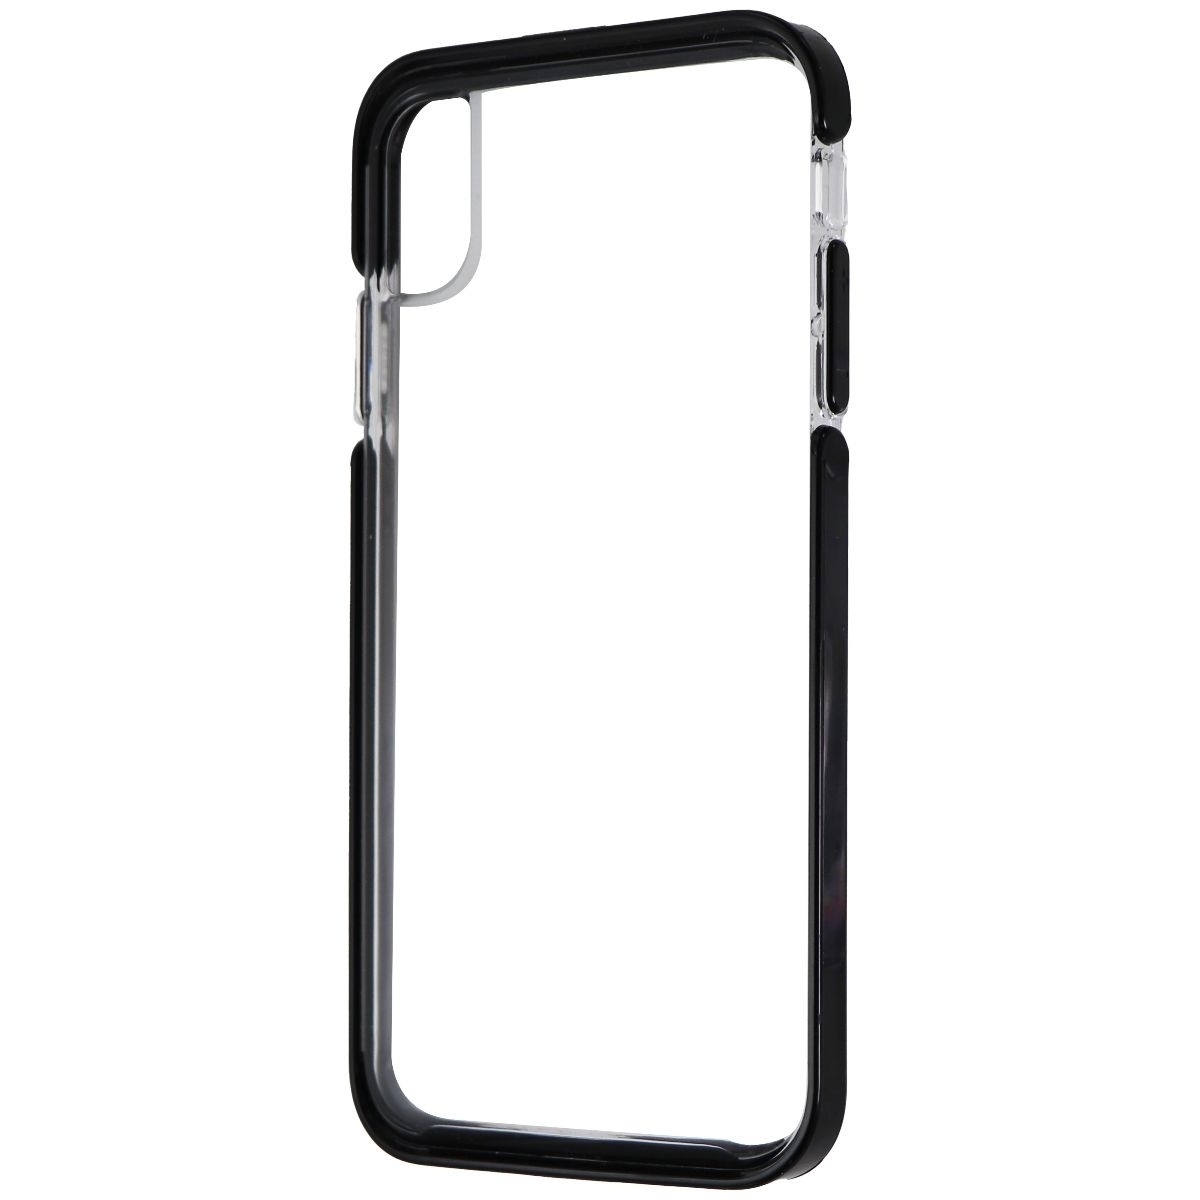 Pelican Ambassador Series Hard Case For IPhone XS Max - Clear/Black